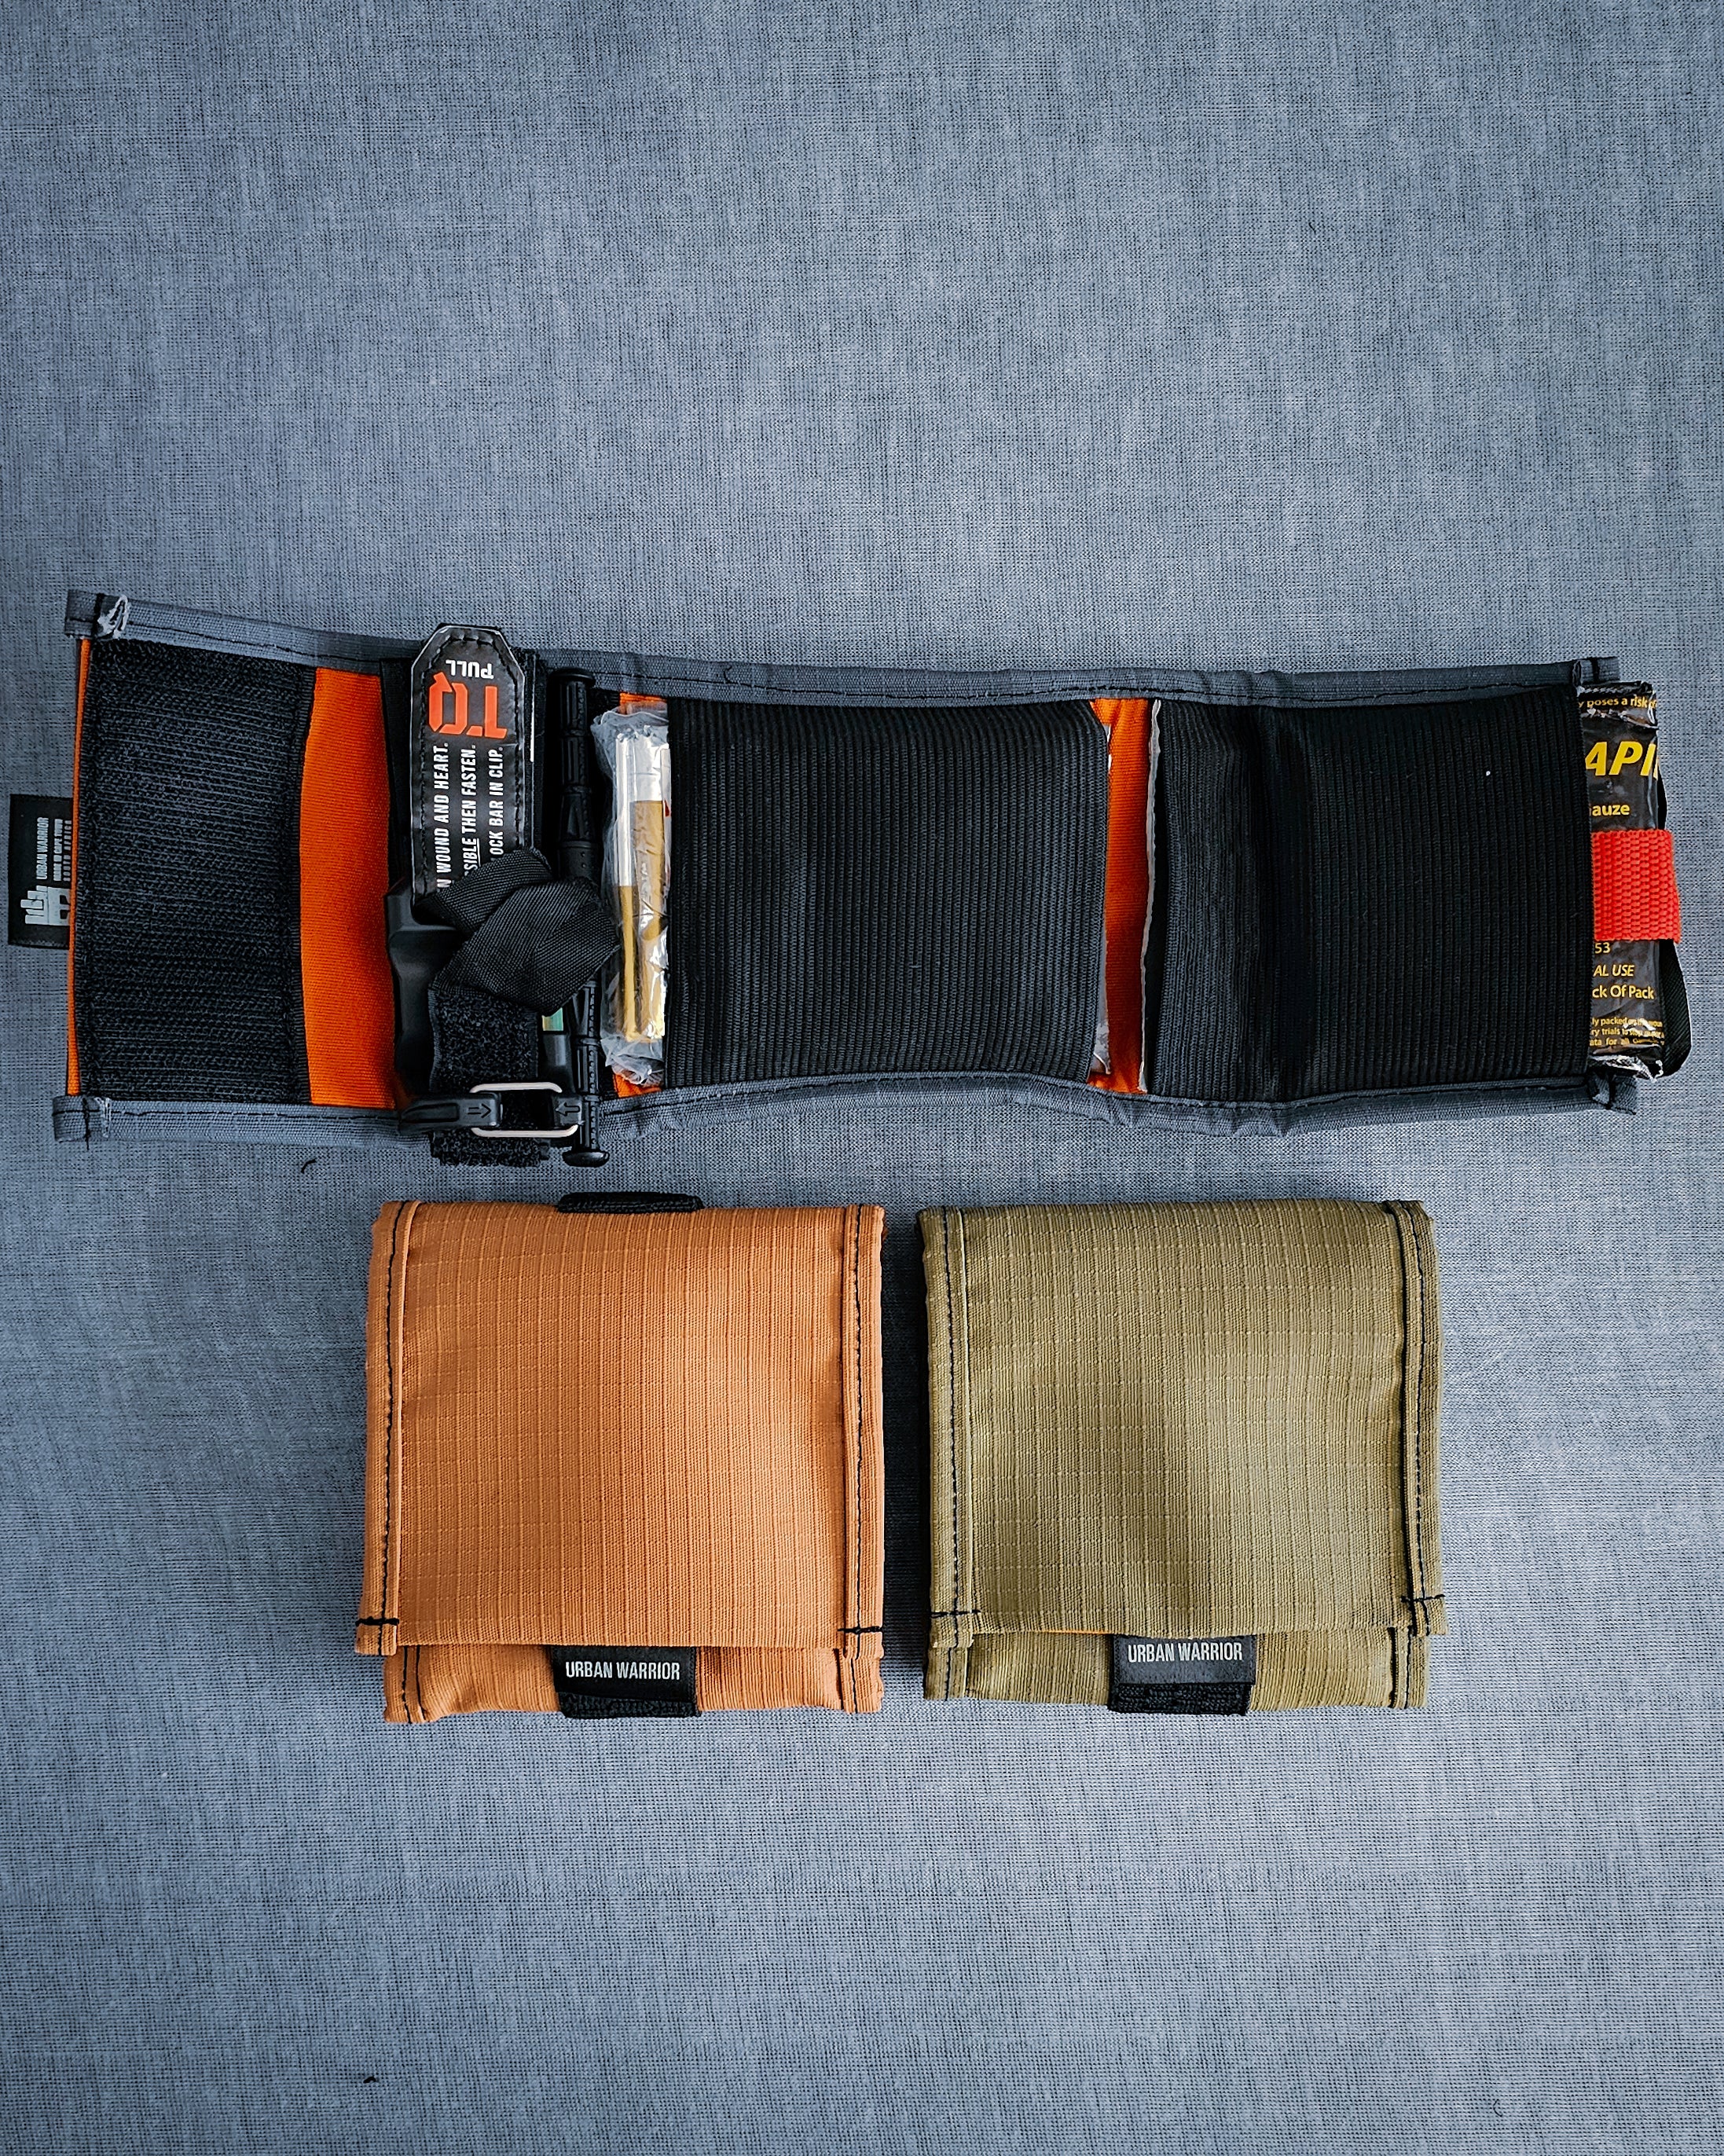 Urban Warrior Compact Ready Pouch (Pouch only)